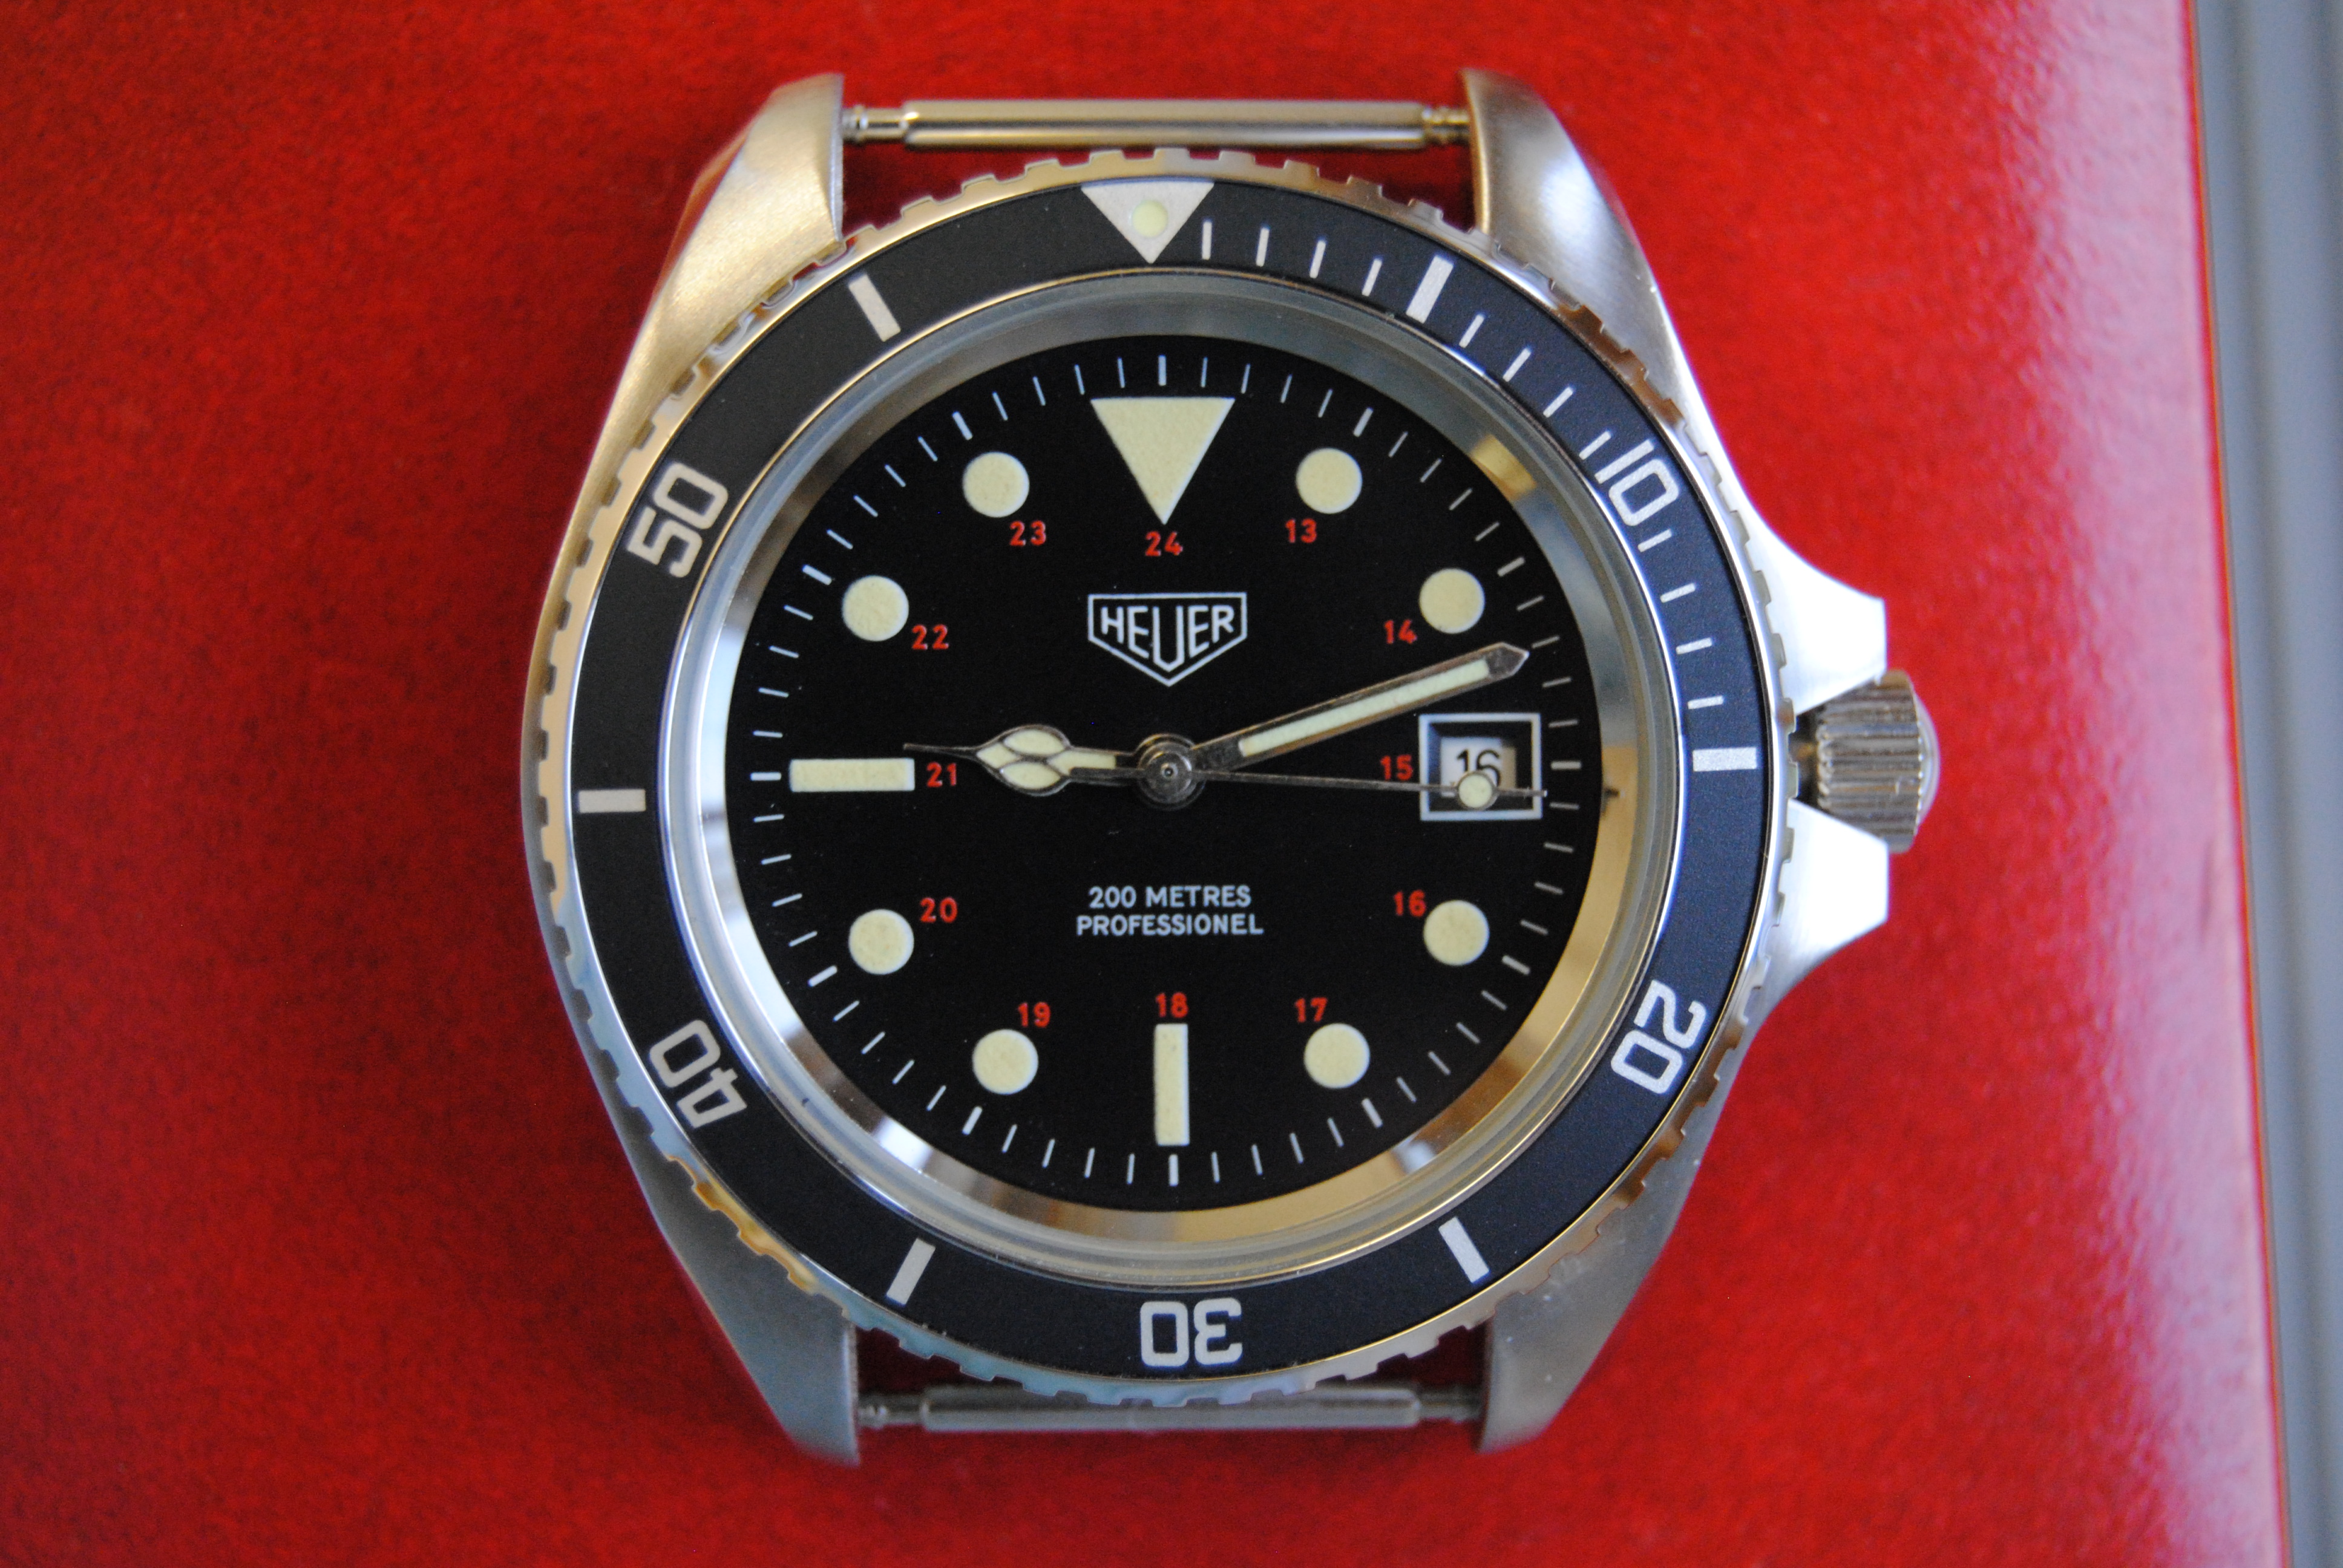 Why The Heuer Diver Professional 